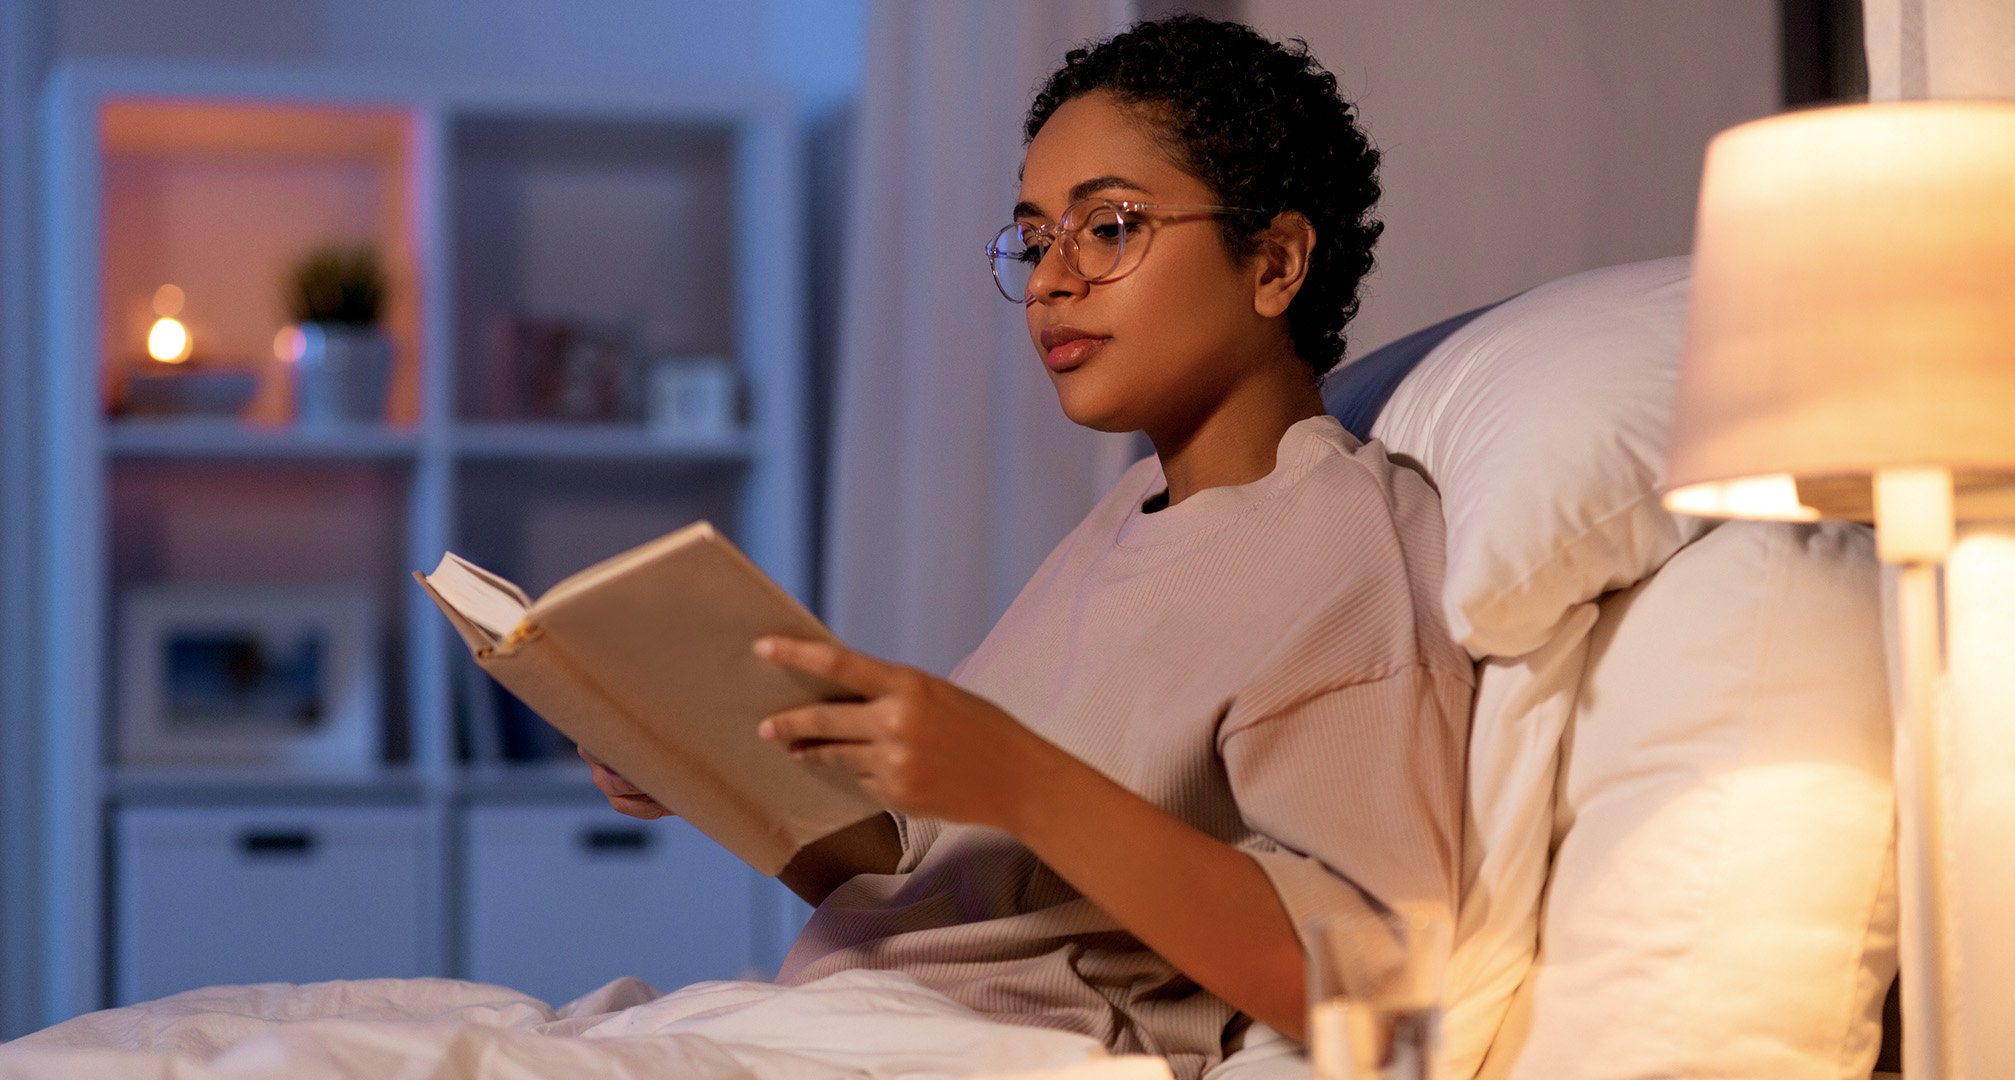 person wearing glasses and reading a book in dimly lit room